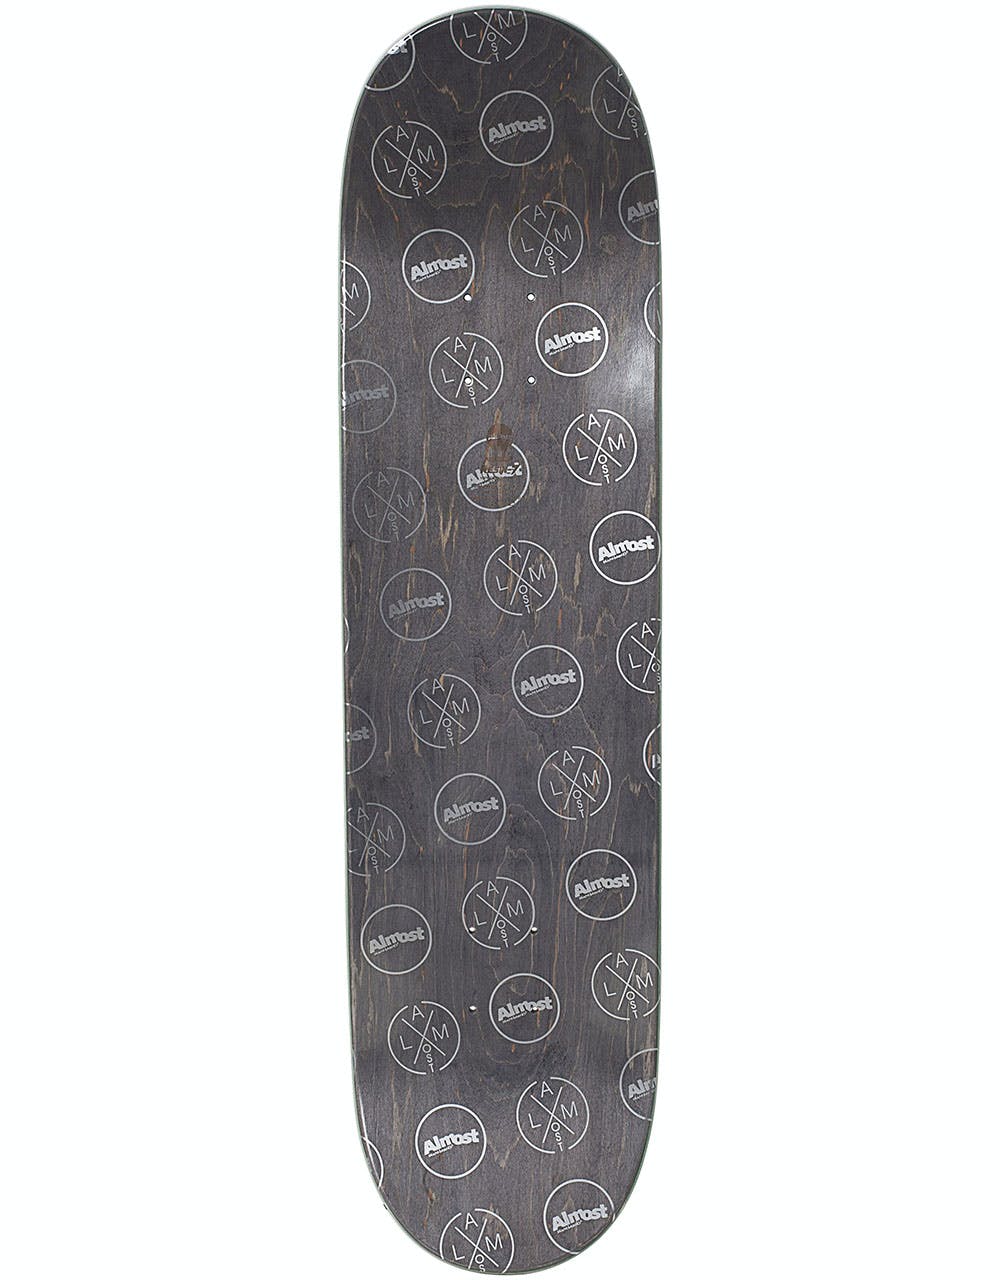 Almost Ultimate Cover Up R7 Skateboard Deck - 8.25"